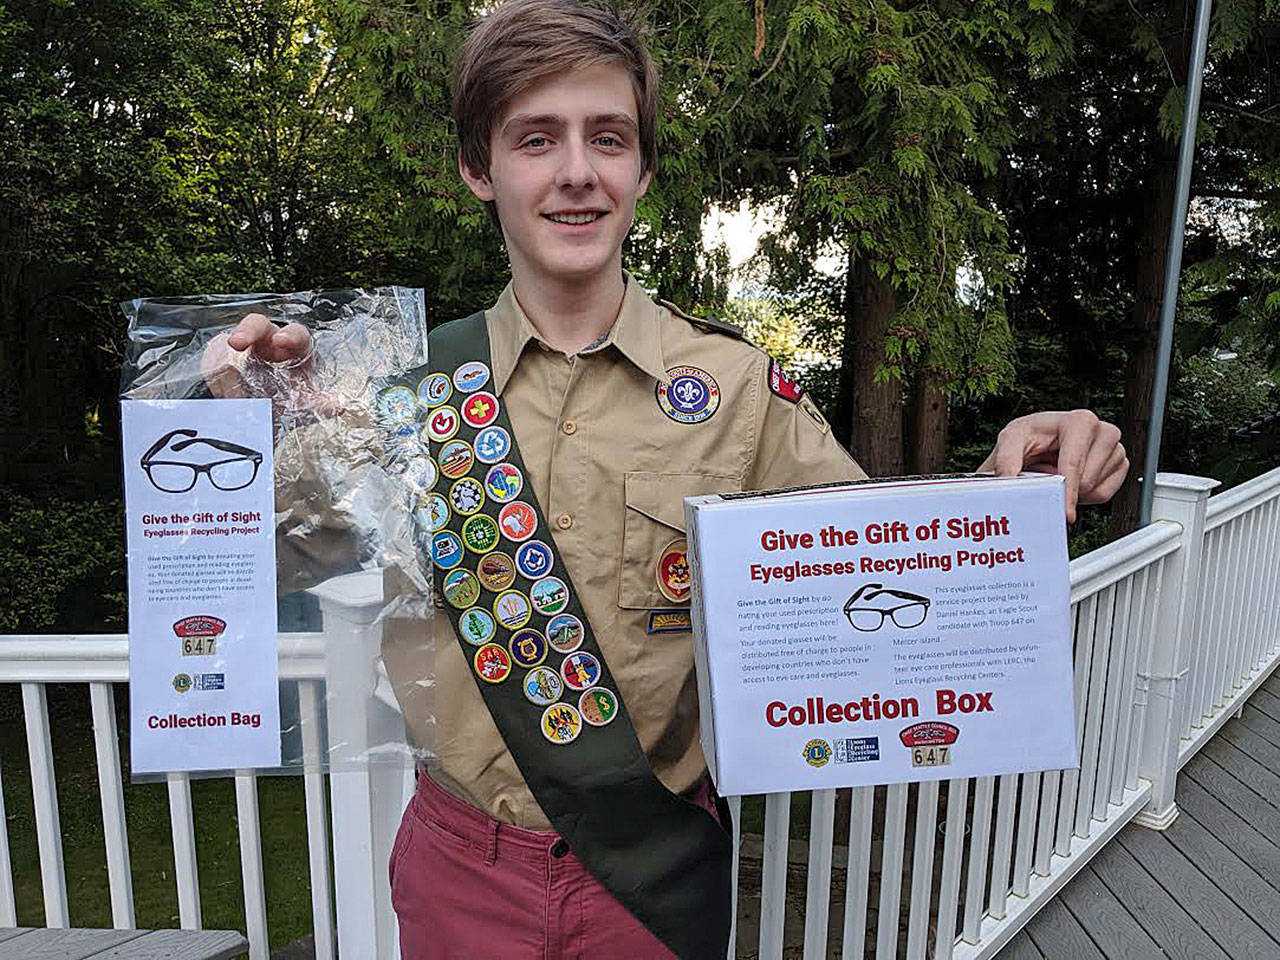 Courtesy photo                                 Daniel Hankes, a junior at Mercer Island High School, is leading a drive to collect eyeglasses to be processed and distributed by the Northwest Lions Club Eyeglasses Recycling Center for his Eagle Scout Service Project.